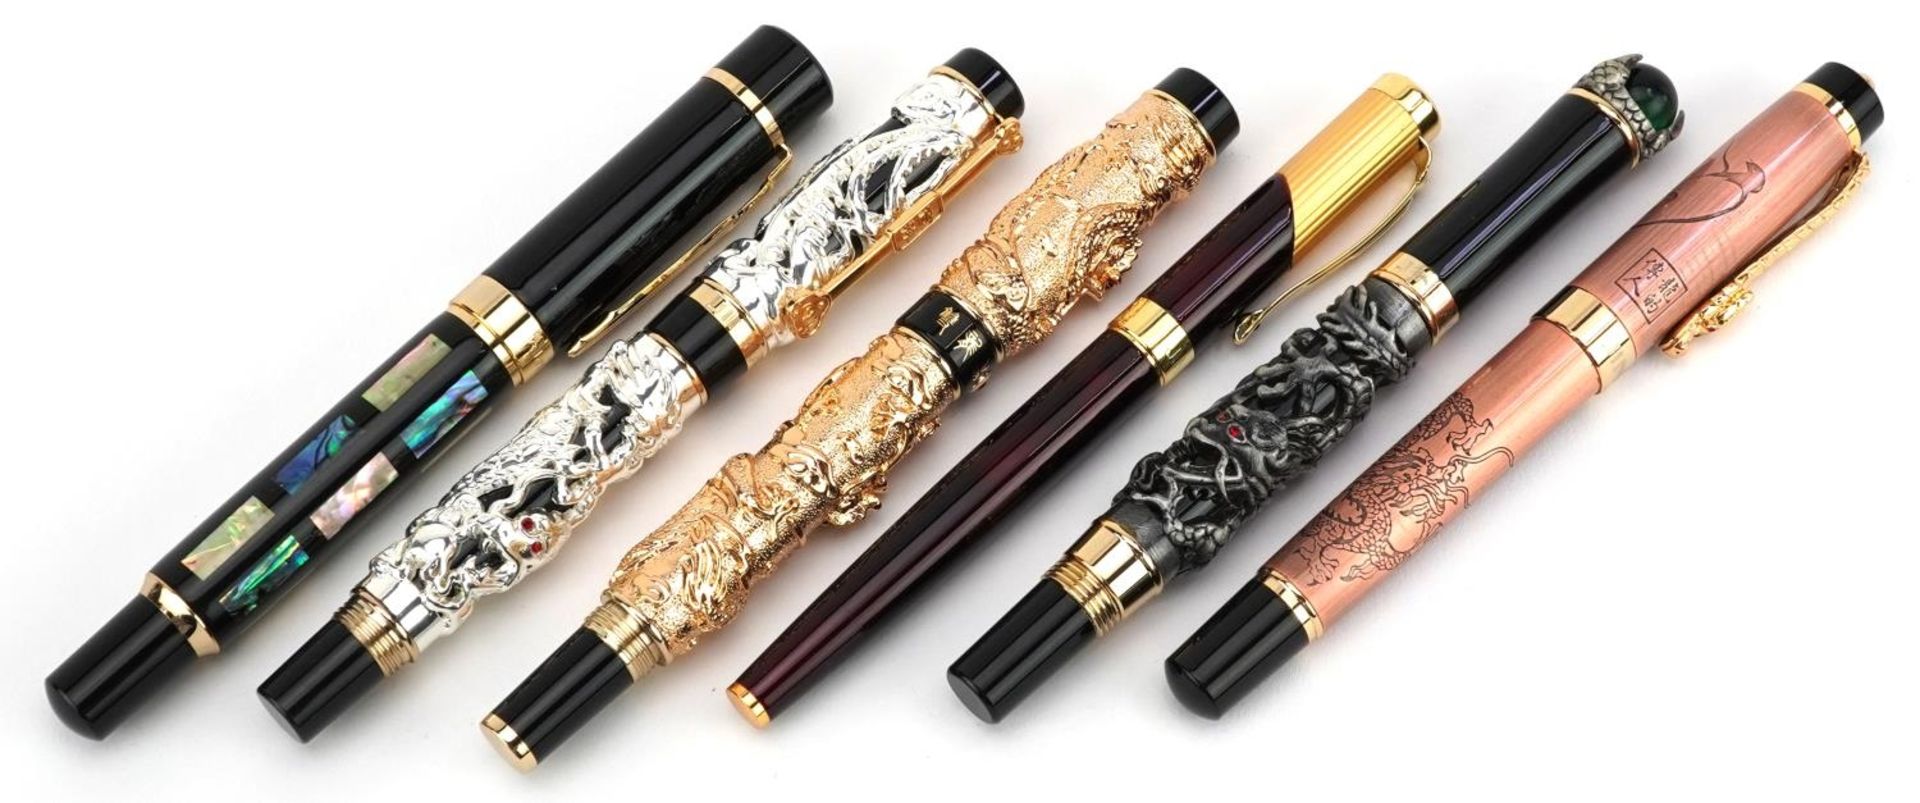 Six Chinese Jinhao fountain pens including three dragon examples : For further information on this